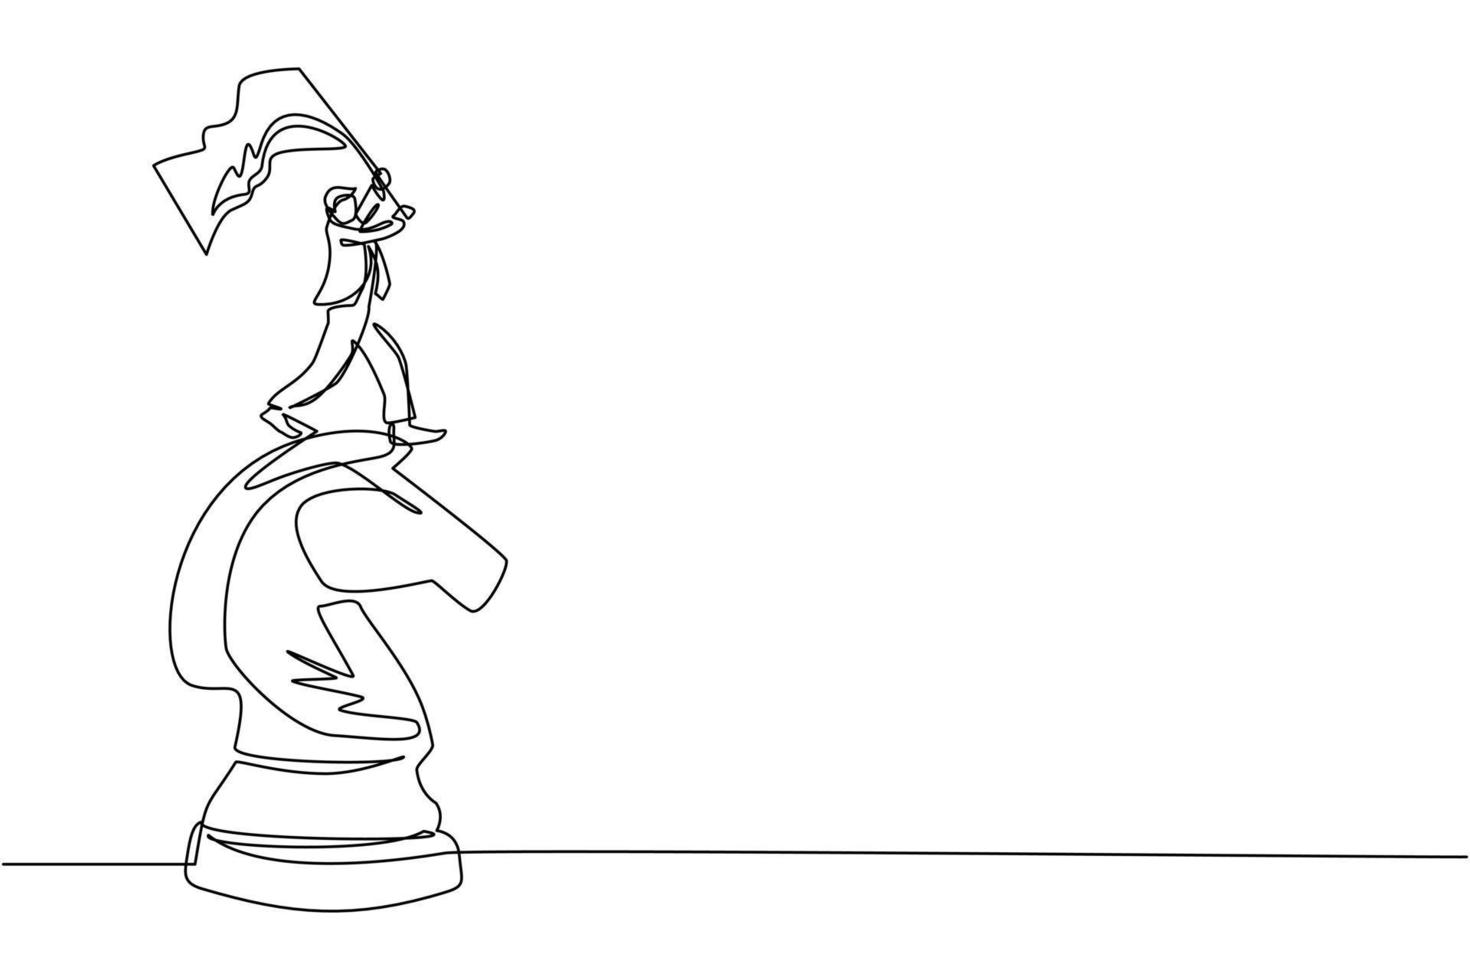 Single continuous line drawing businessman standing on top of big horse knight chess and waving a flag. Business achievement goal, metaphor concept. One line draw graphic design vector illustration